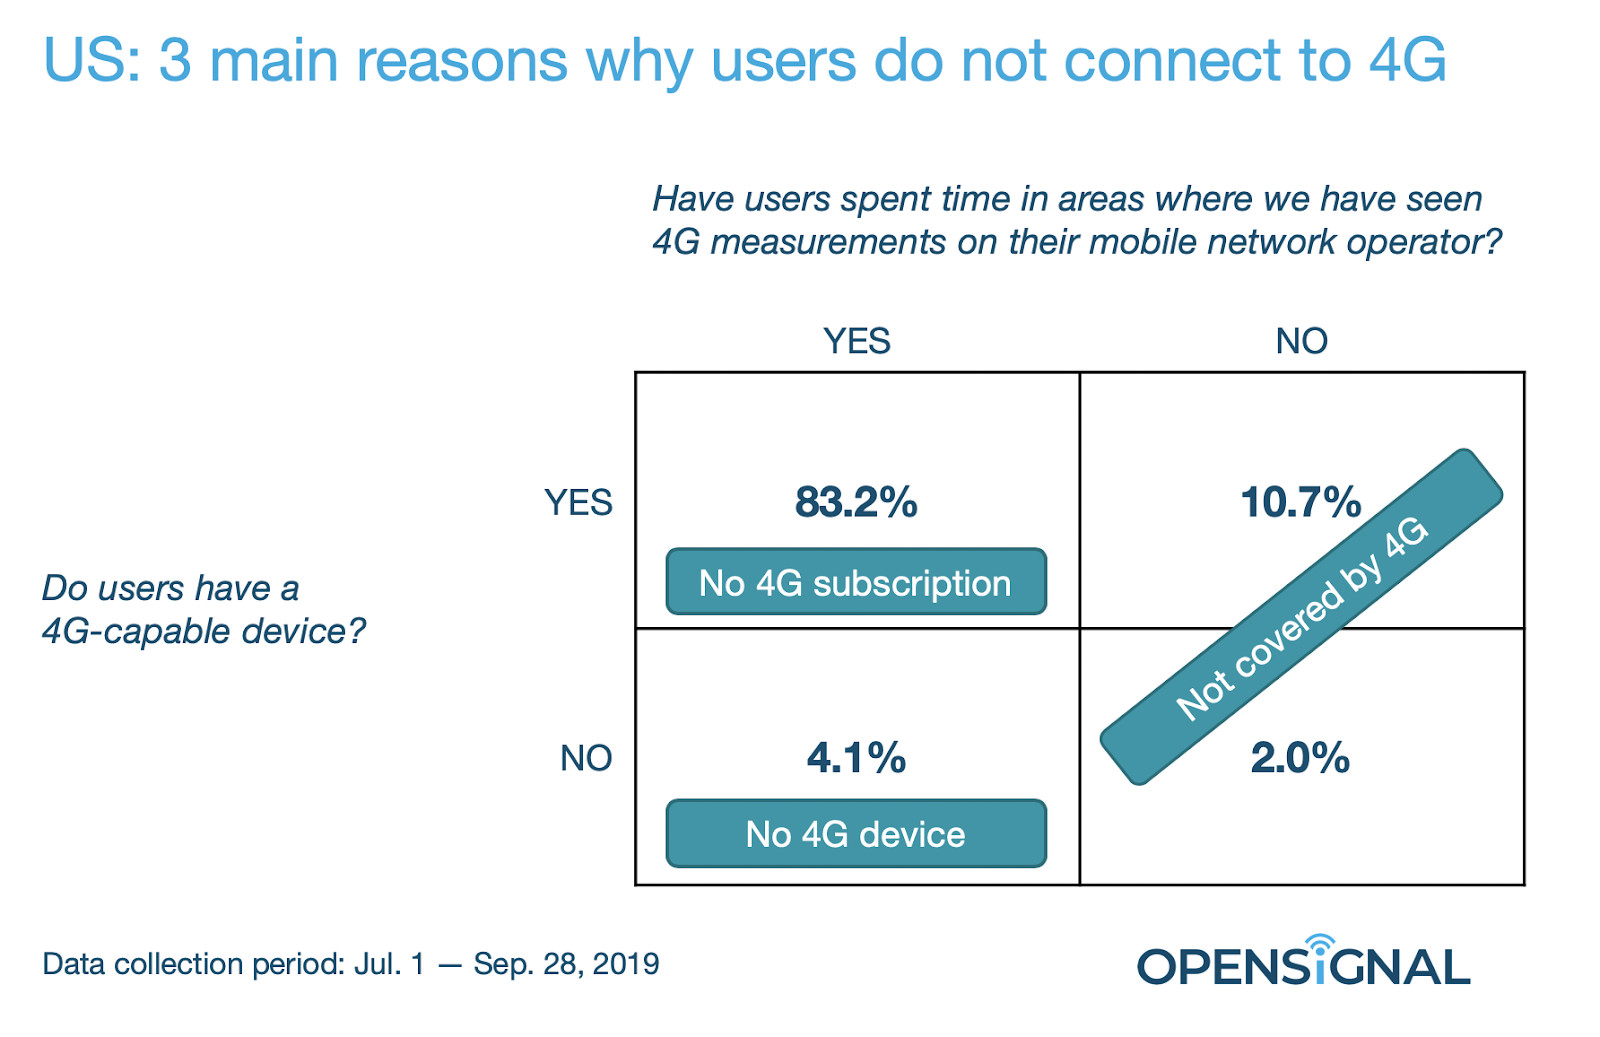 OpenSignal reasons why users use 3G